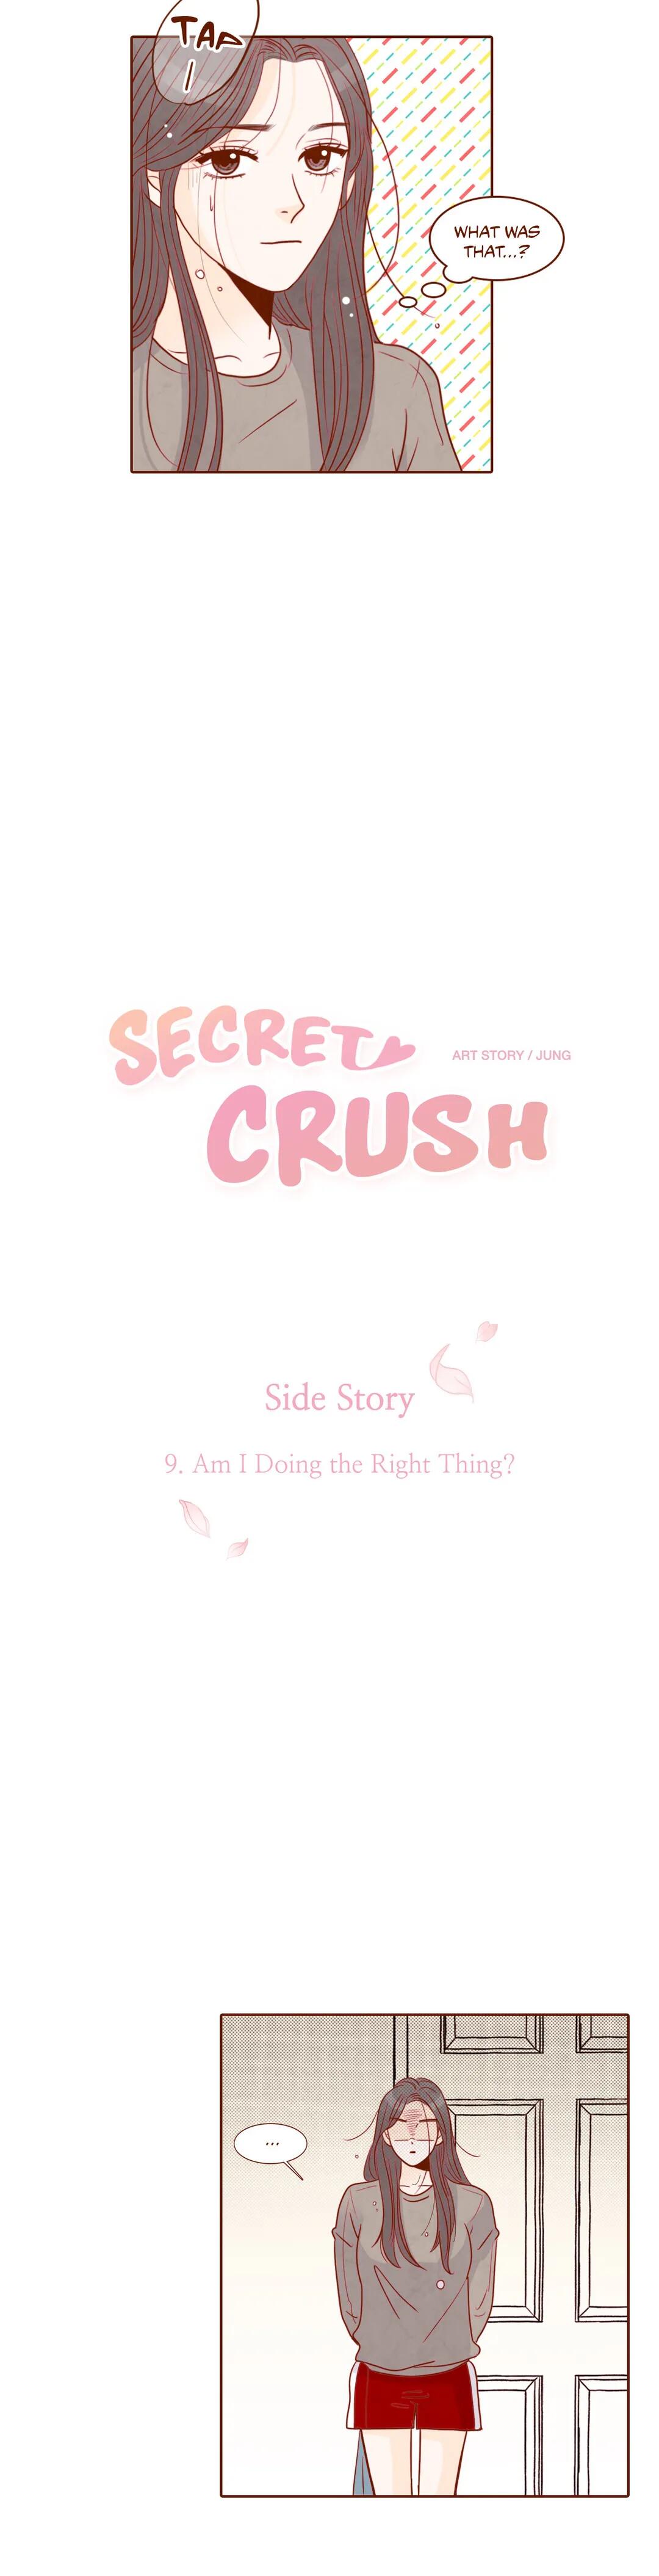 Secret Crush Chapter 102 - Side Story: Am I Doing The Right Thing? - Picture 3